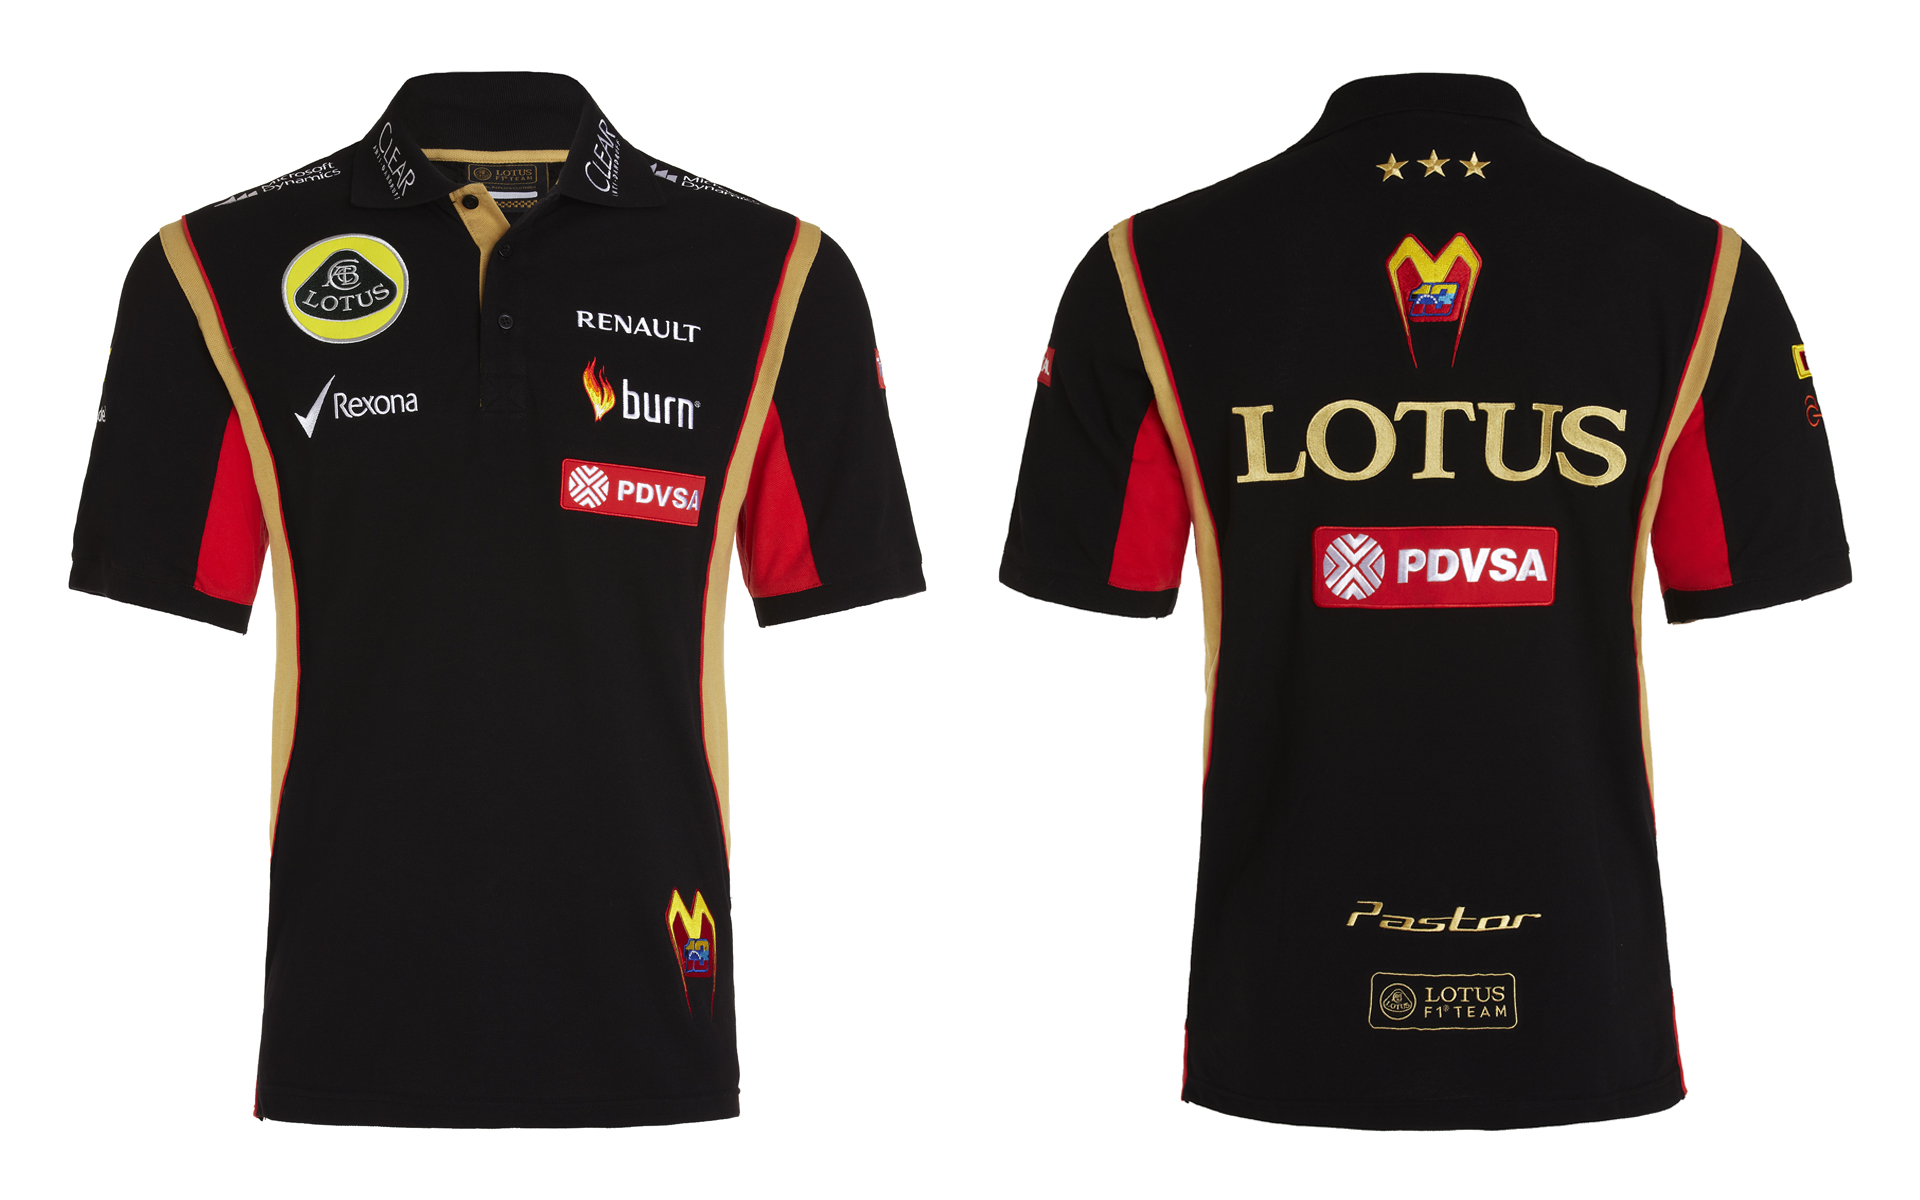 Lotus f1 formula one racing top front and back invisible mannequin commerce photo shoot